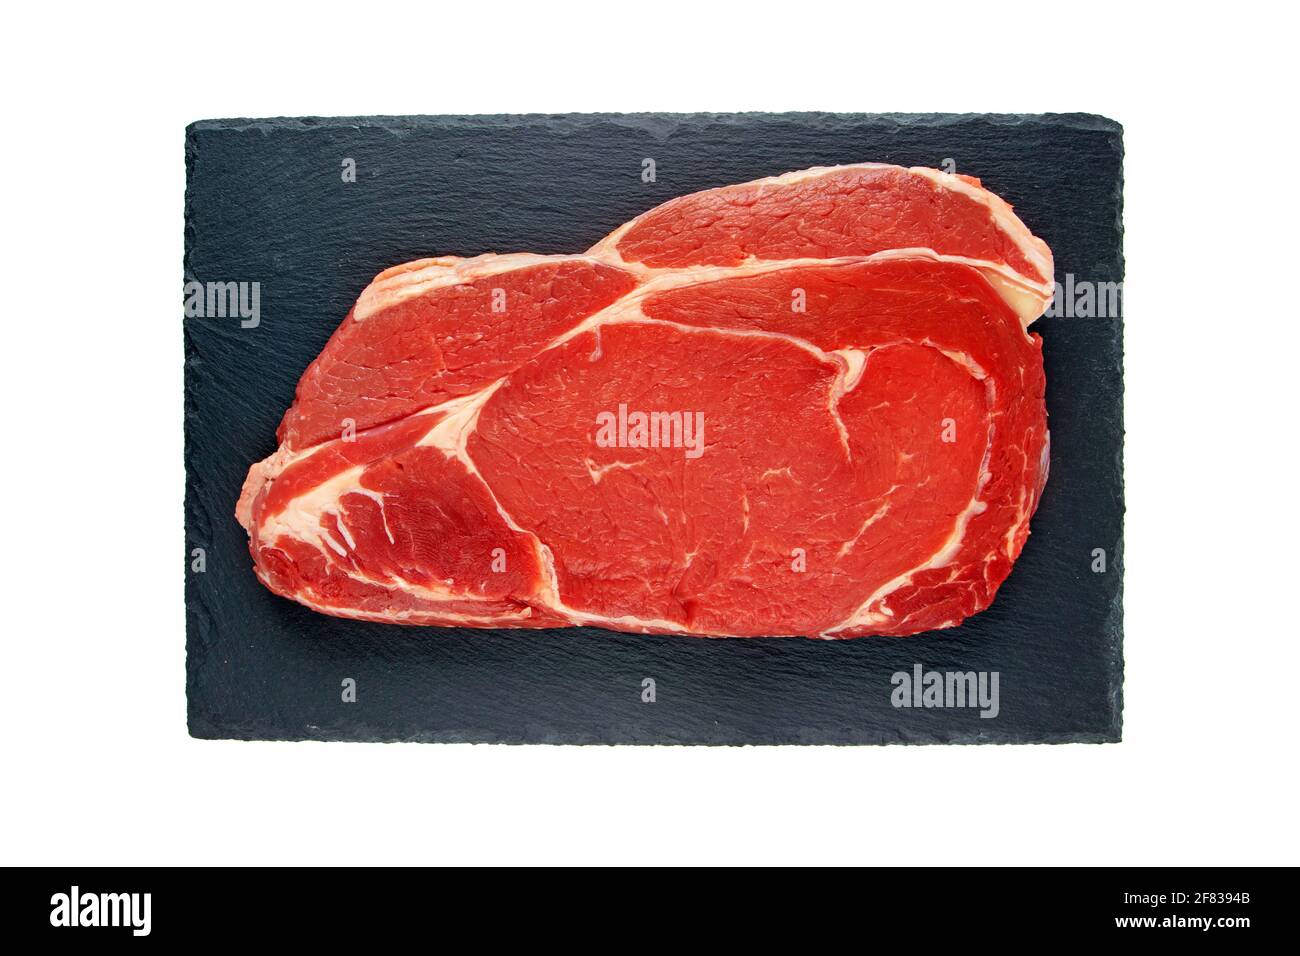 Juicy raw meat cut. Beef entrecote slice on the black textured slate plate isolated on white top view. Stock Photo